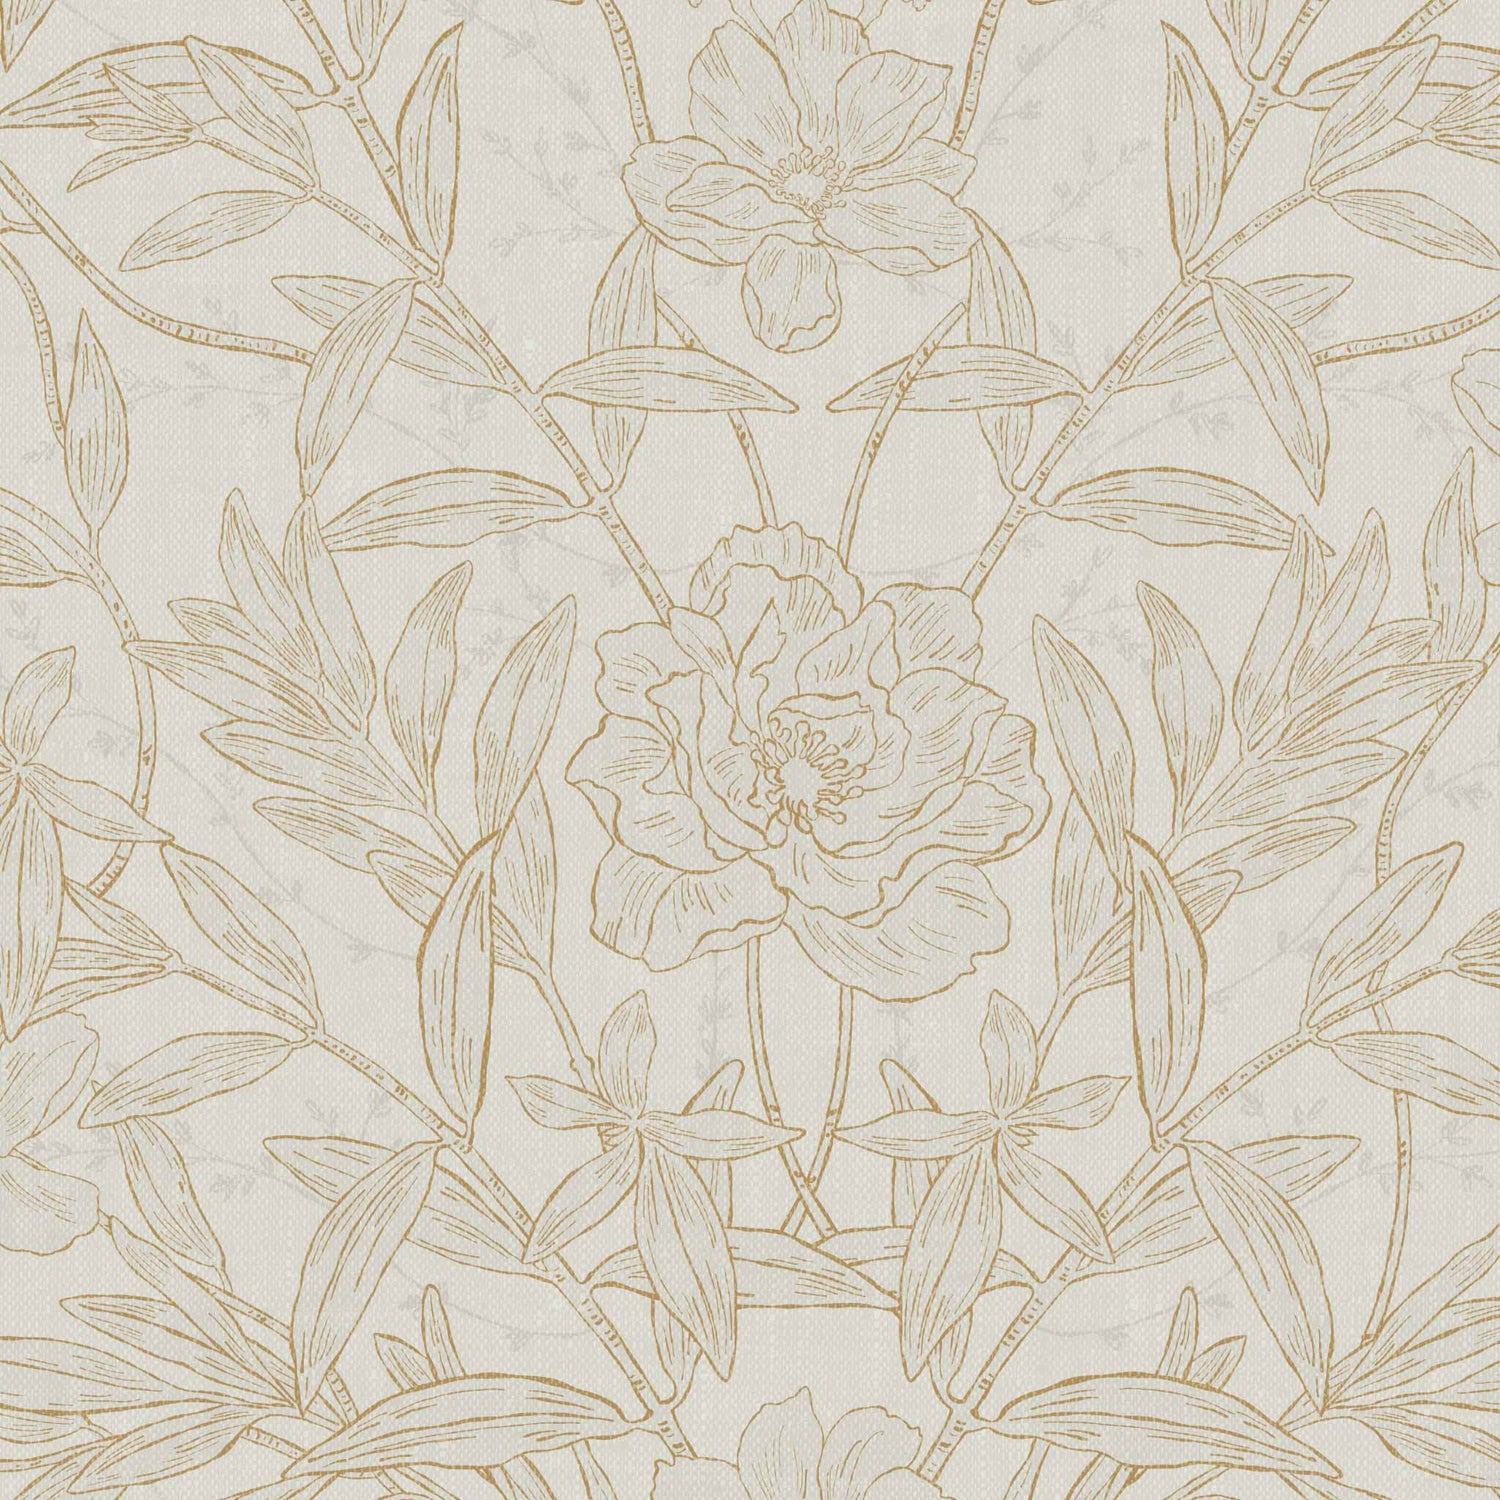 Our luxurious Peony Garden Wallpaper in Bone adds a majestic touch of sophistication to any space. Its distinctive classic peonies are guaranteed to add a sense of elegance to any wall. 